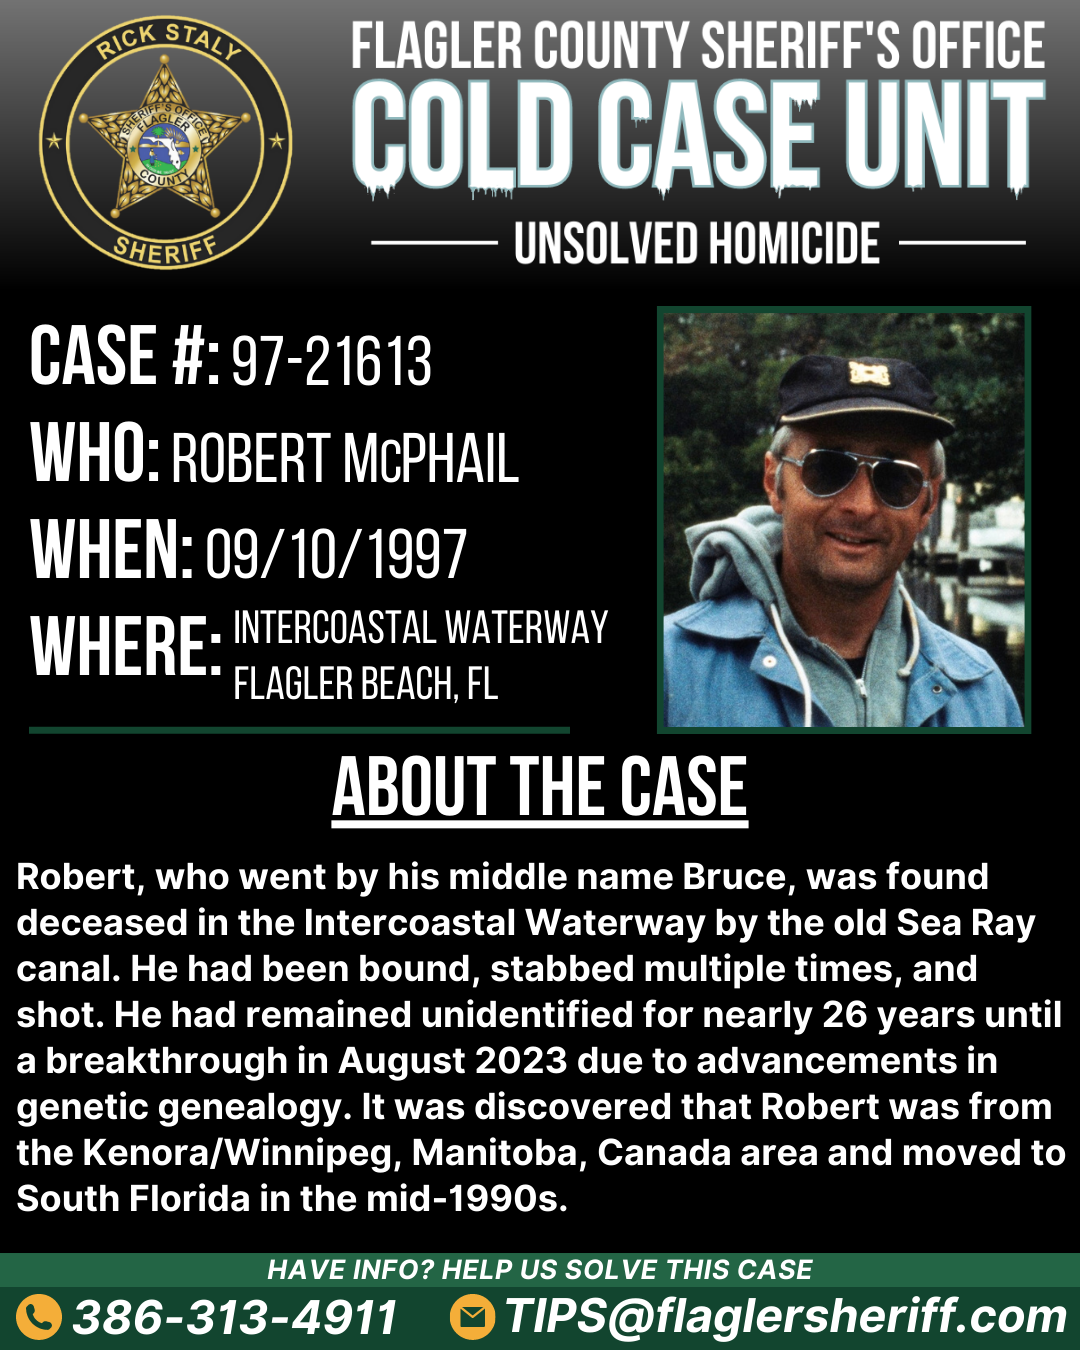 Unsolved homicide. Case #97-21613. Who: Robert "Bruce" McPhail. When: 09/10/1997. Where: Intercoastal Waterway (Flagler Beach, FL). About the case: Robert was found deceased in the Intercoastal Waterway by the old Sea Ray canal. He had been bound, stabbed multiple times, and shot. He had remained unidentified for nearly 26 years until a breakthrough in August 2023 due to advancements in genetic genealogy.